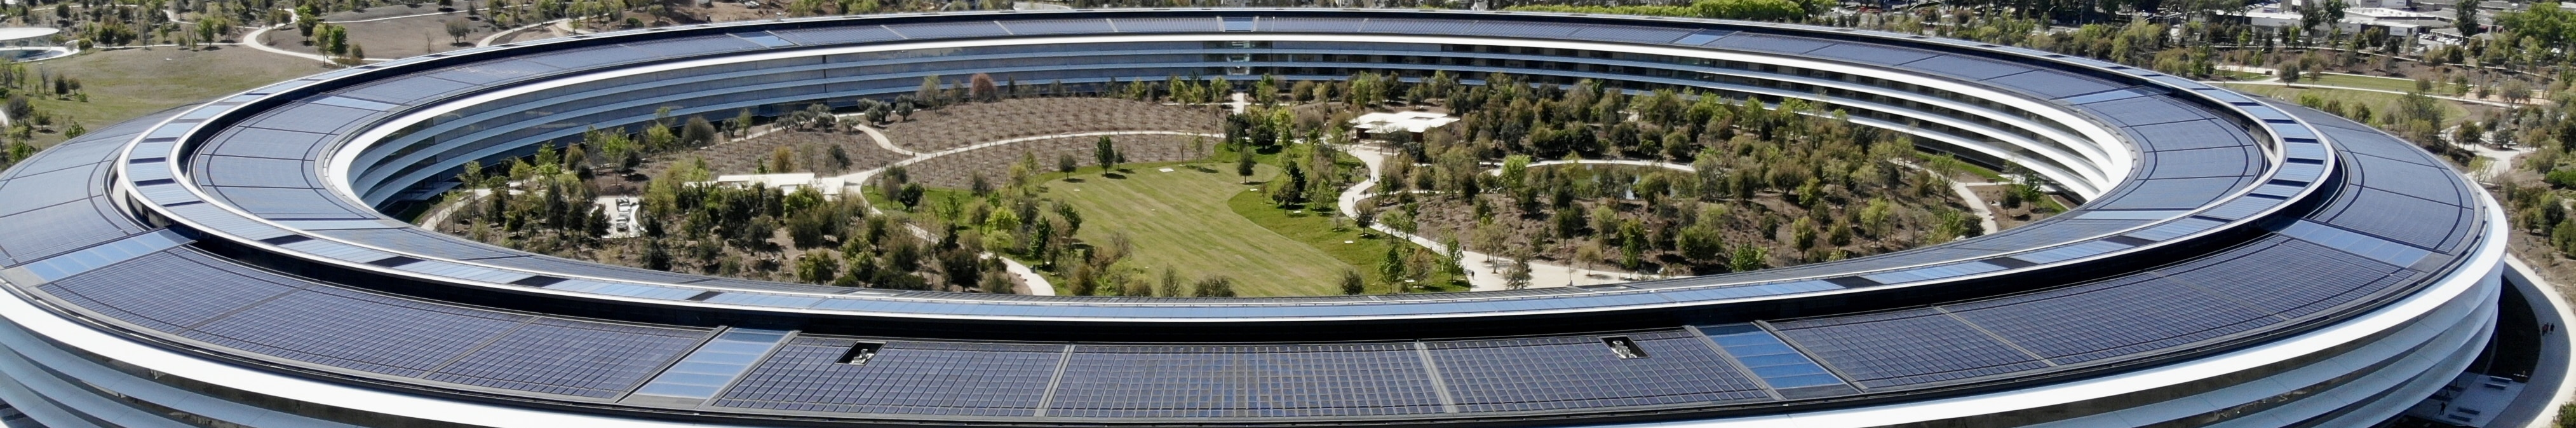 Apple's energy-efficient products helped avoid around 200,000 tCO2e of GHG emissions in 2022